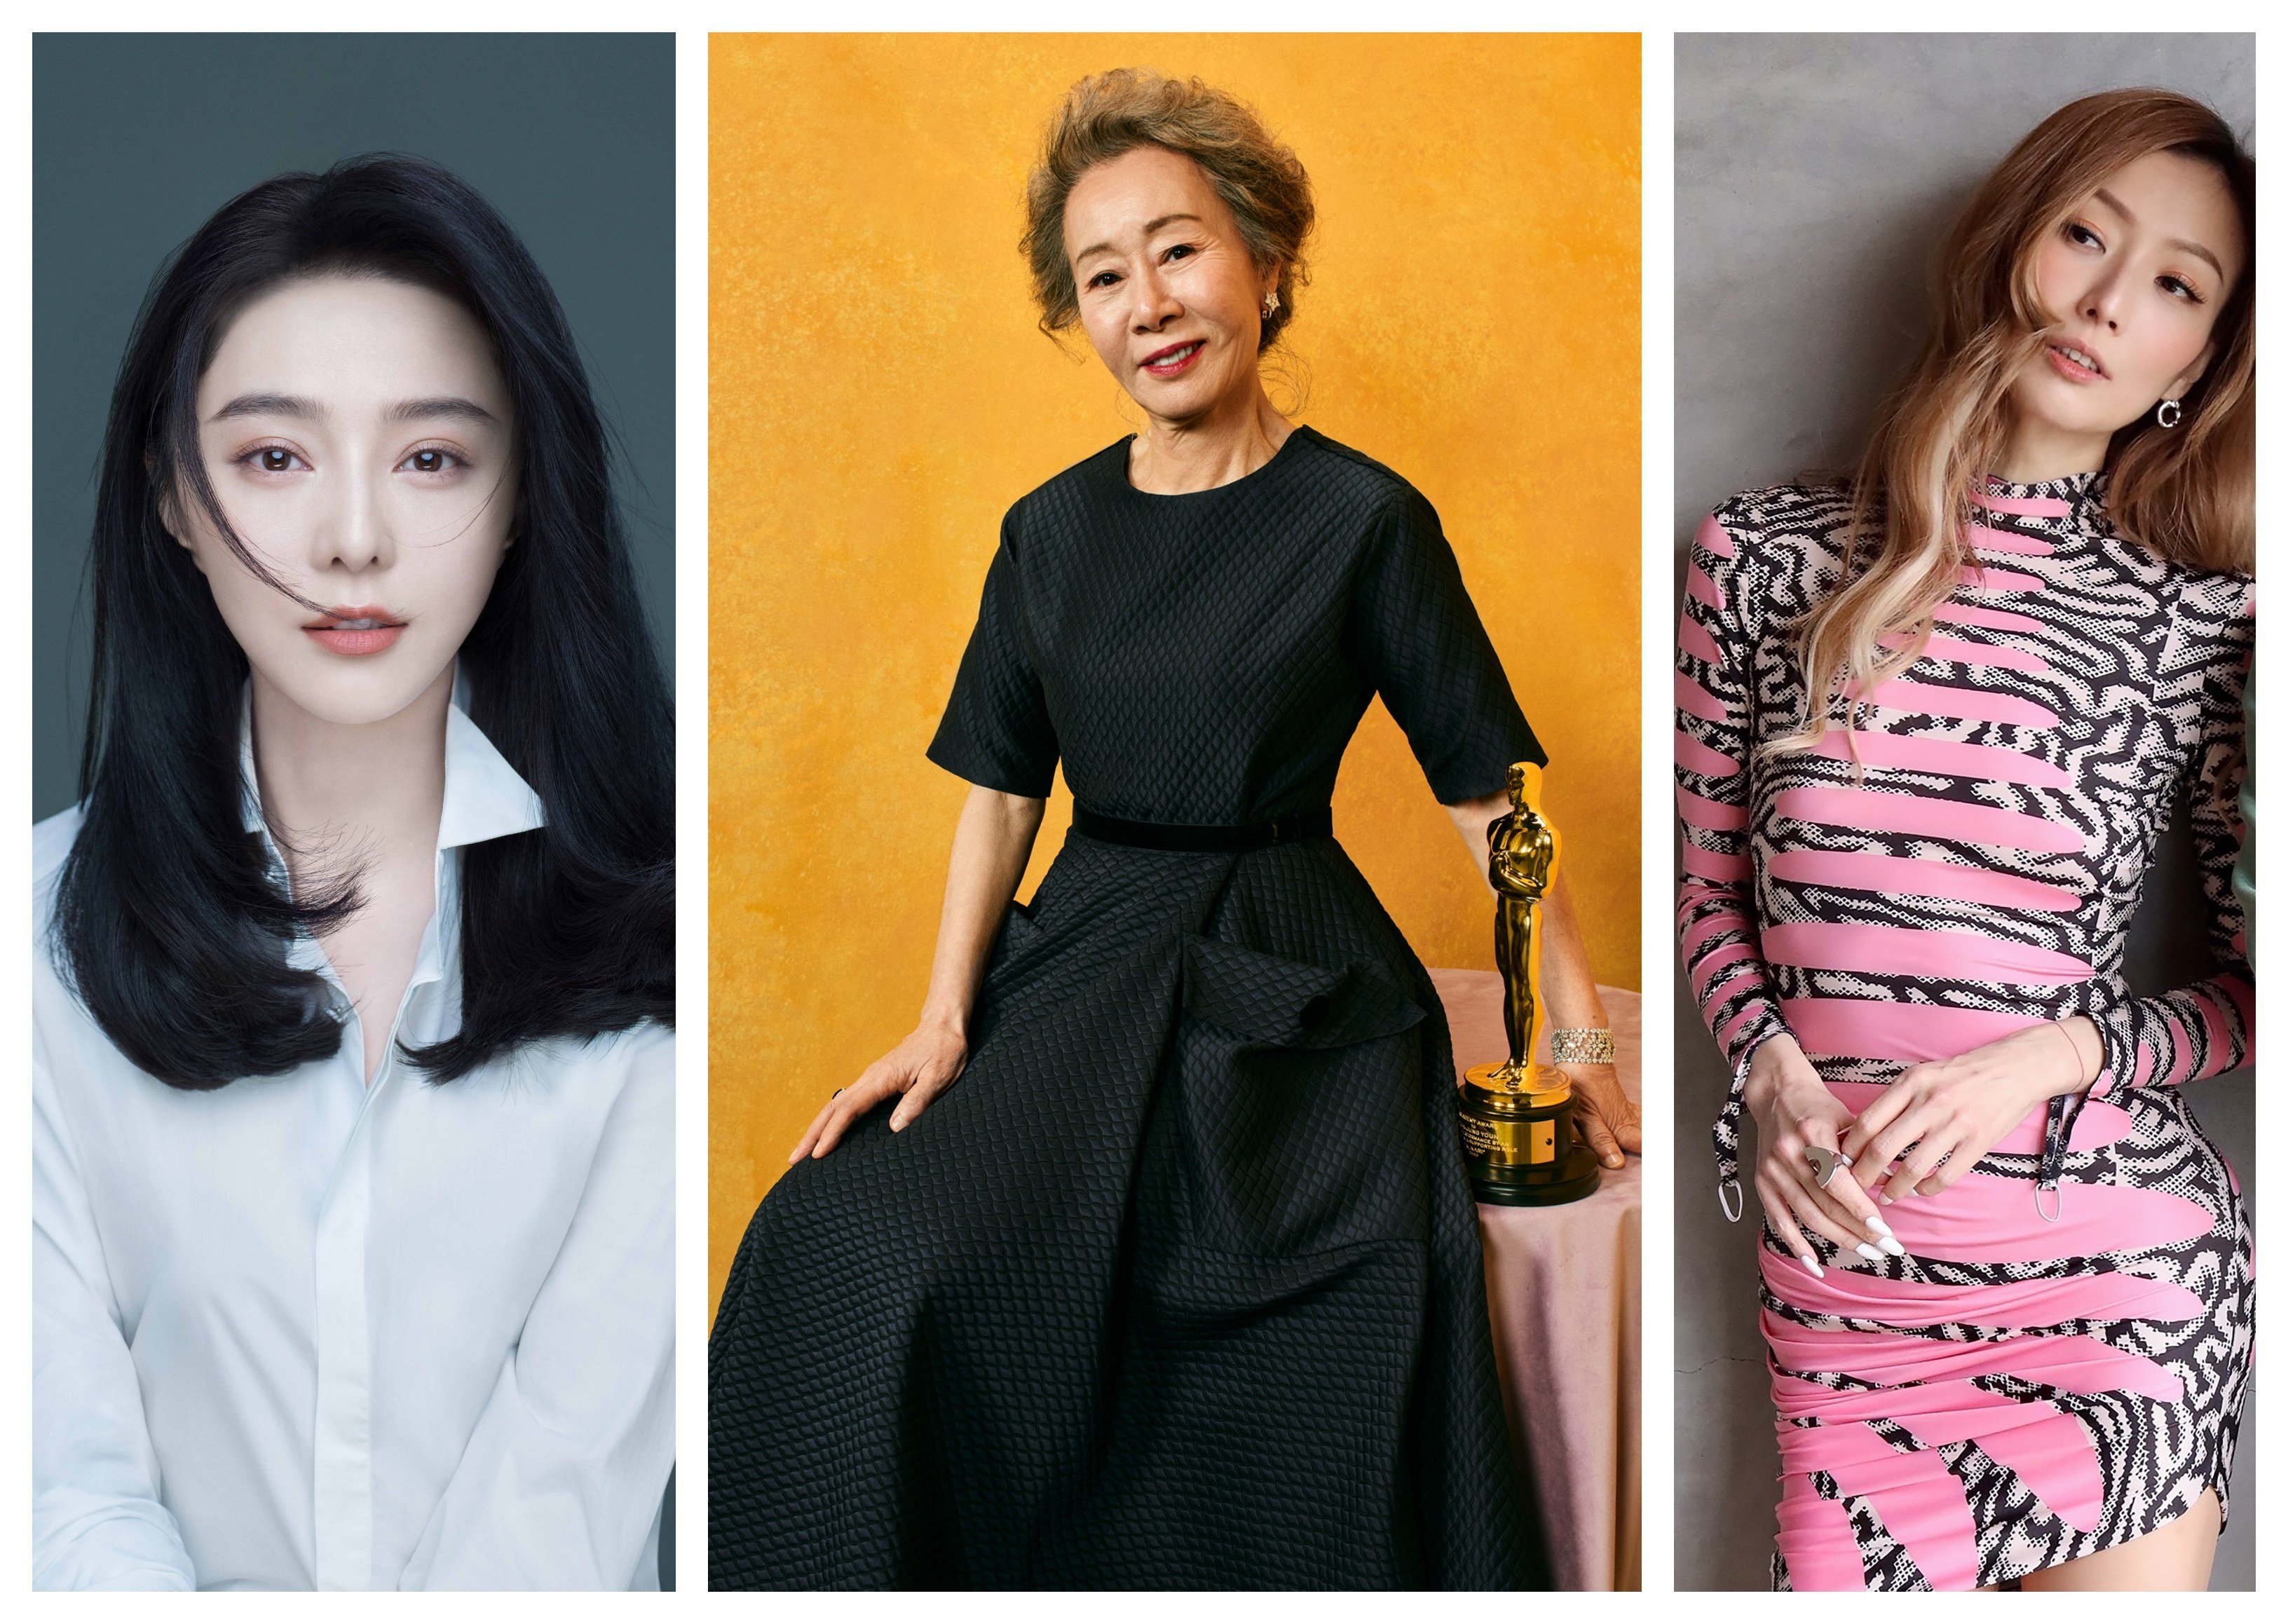 Fan Bingbing, Youn Yuh-jung and Sammi Cheng, stars of screen and stage who are mindful of their fortune to be living the life they are. Photos: @bingbing_fan/Instagram, Quil Lemons, @sammi_chengsauman/Instagram